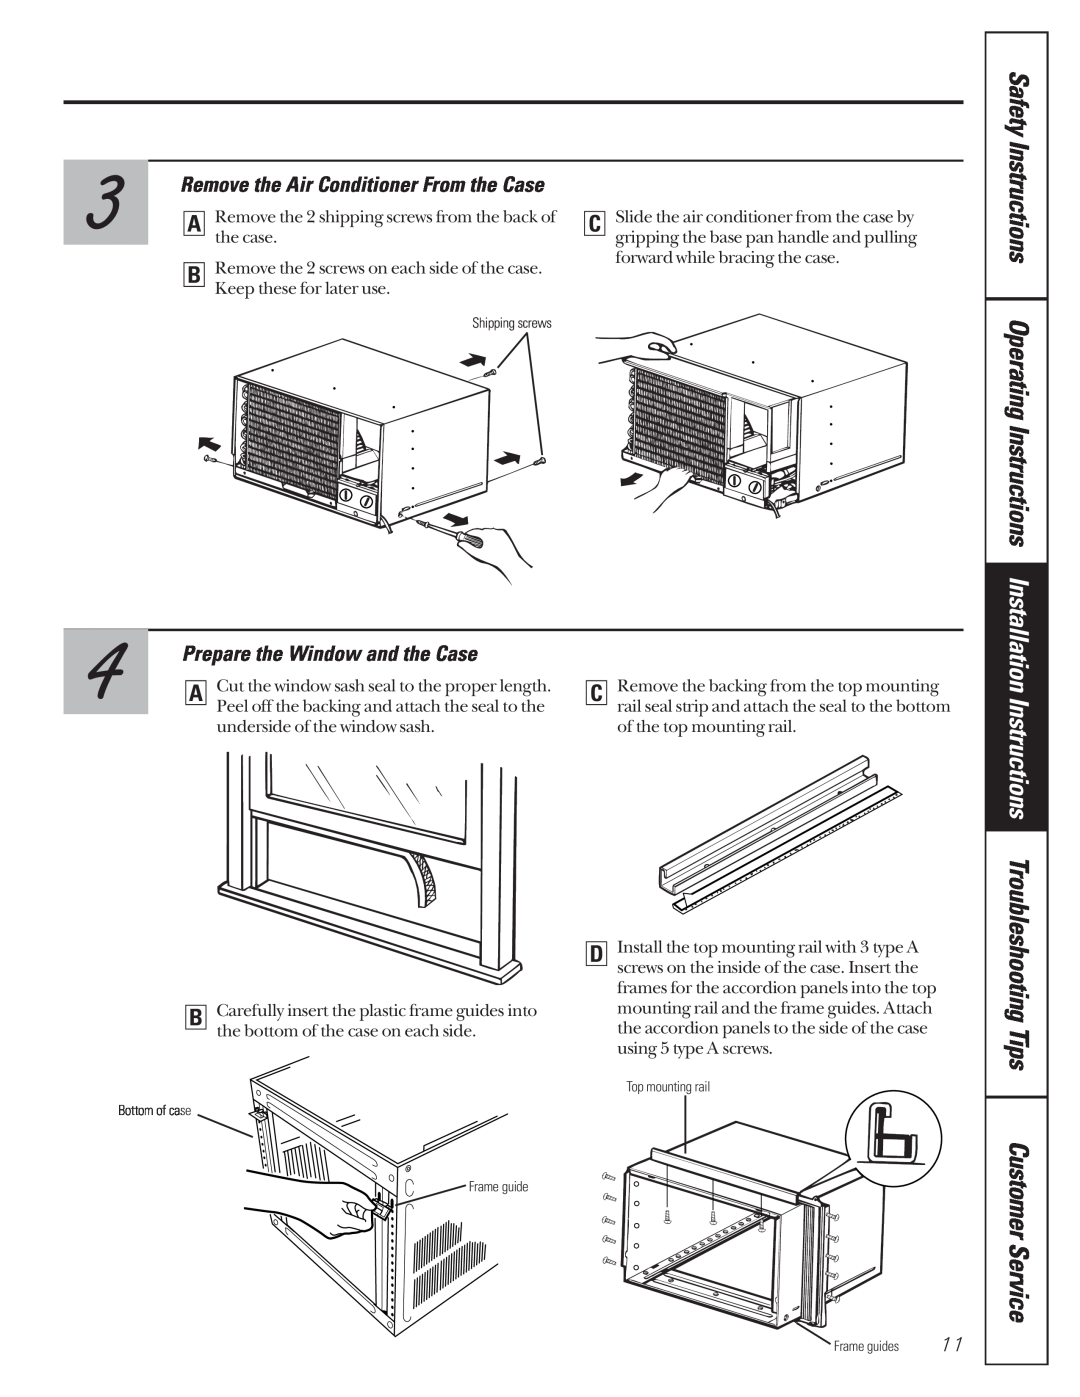 GE 000 BTU, AG_14-14 Safety Instructions Operating Instructions Installation Instructions, Prepare the Window and the Case 